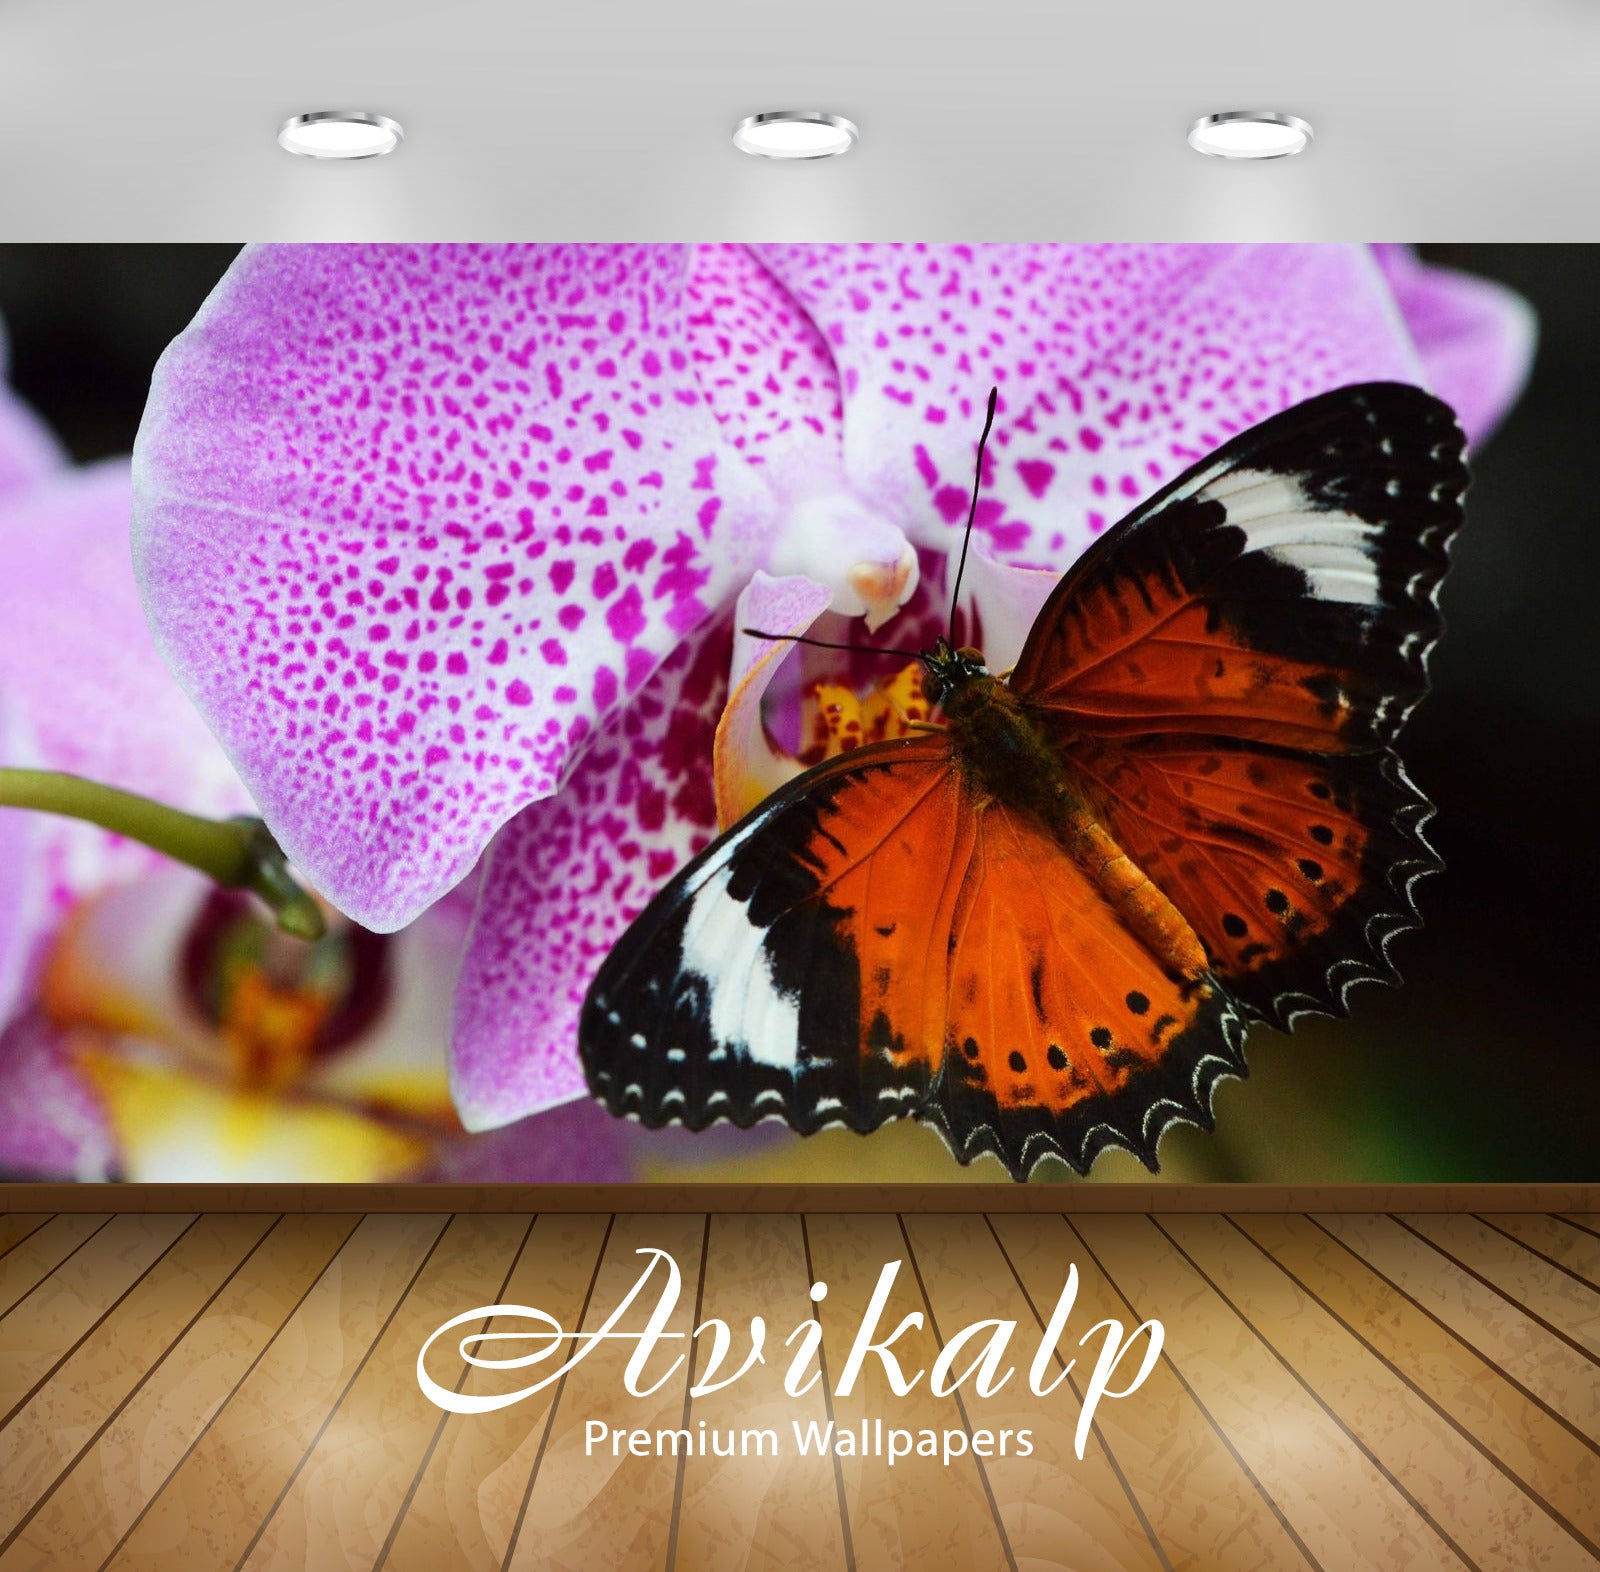 Avikalp Exclusive Awi2373 Animals Insect Orange Butterfly Orchid Purple Full HD Wallpapers for Livin